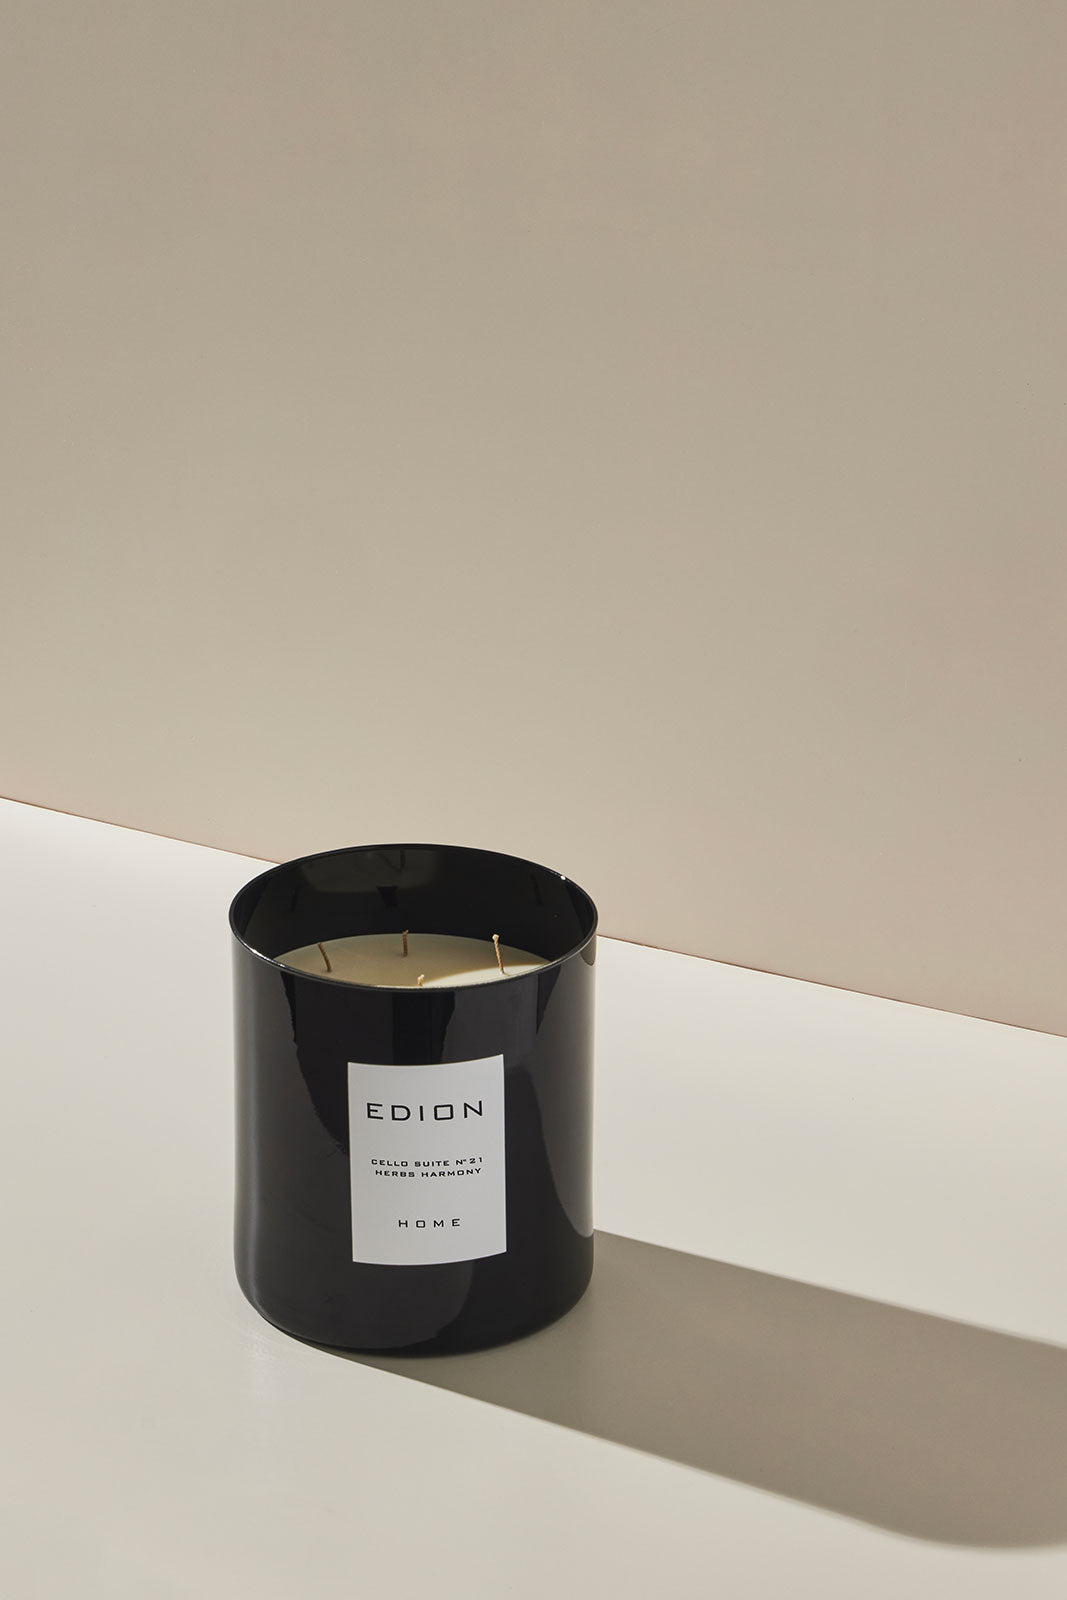 Scented candle Cello suite n. 21 Herbs Harmony